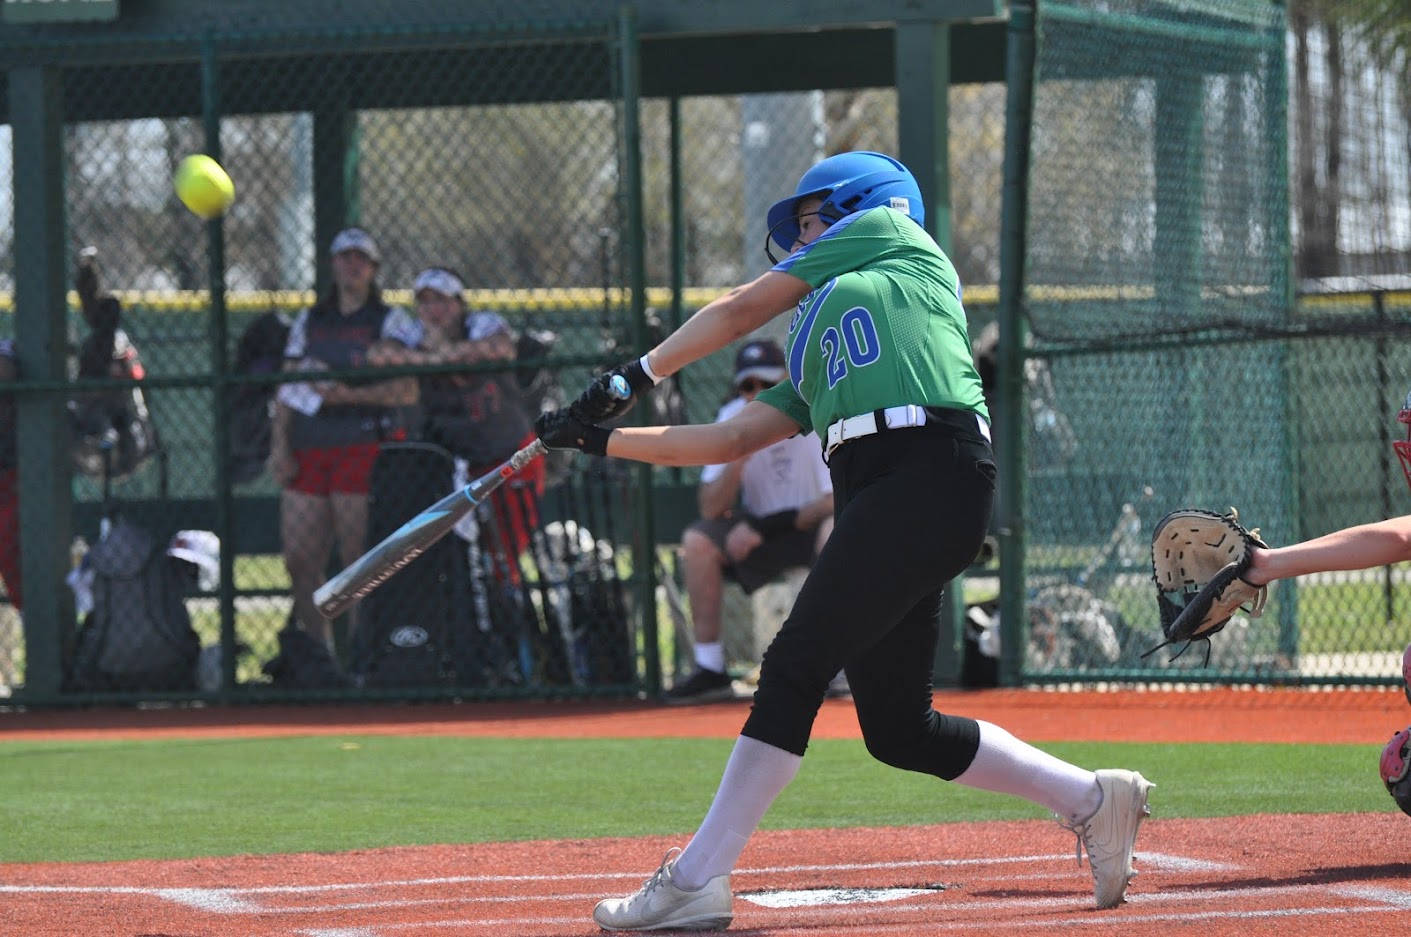 Ellie Miller drives a ball at the plate